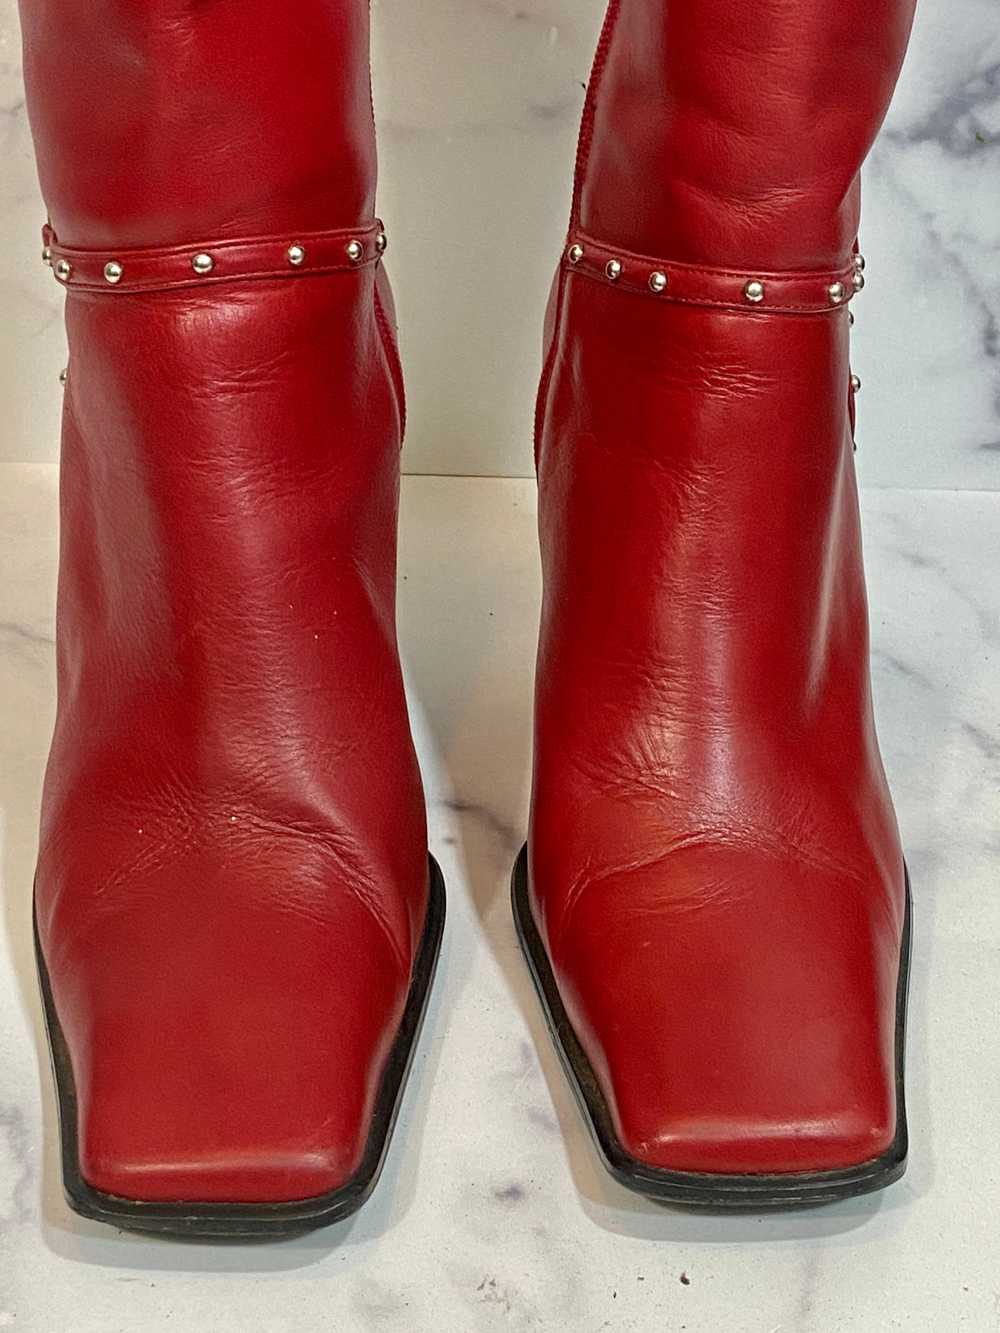 Motor Blaze red leather boots - image 10